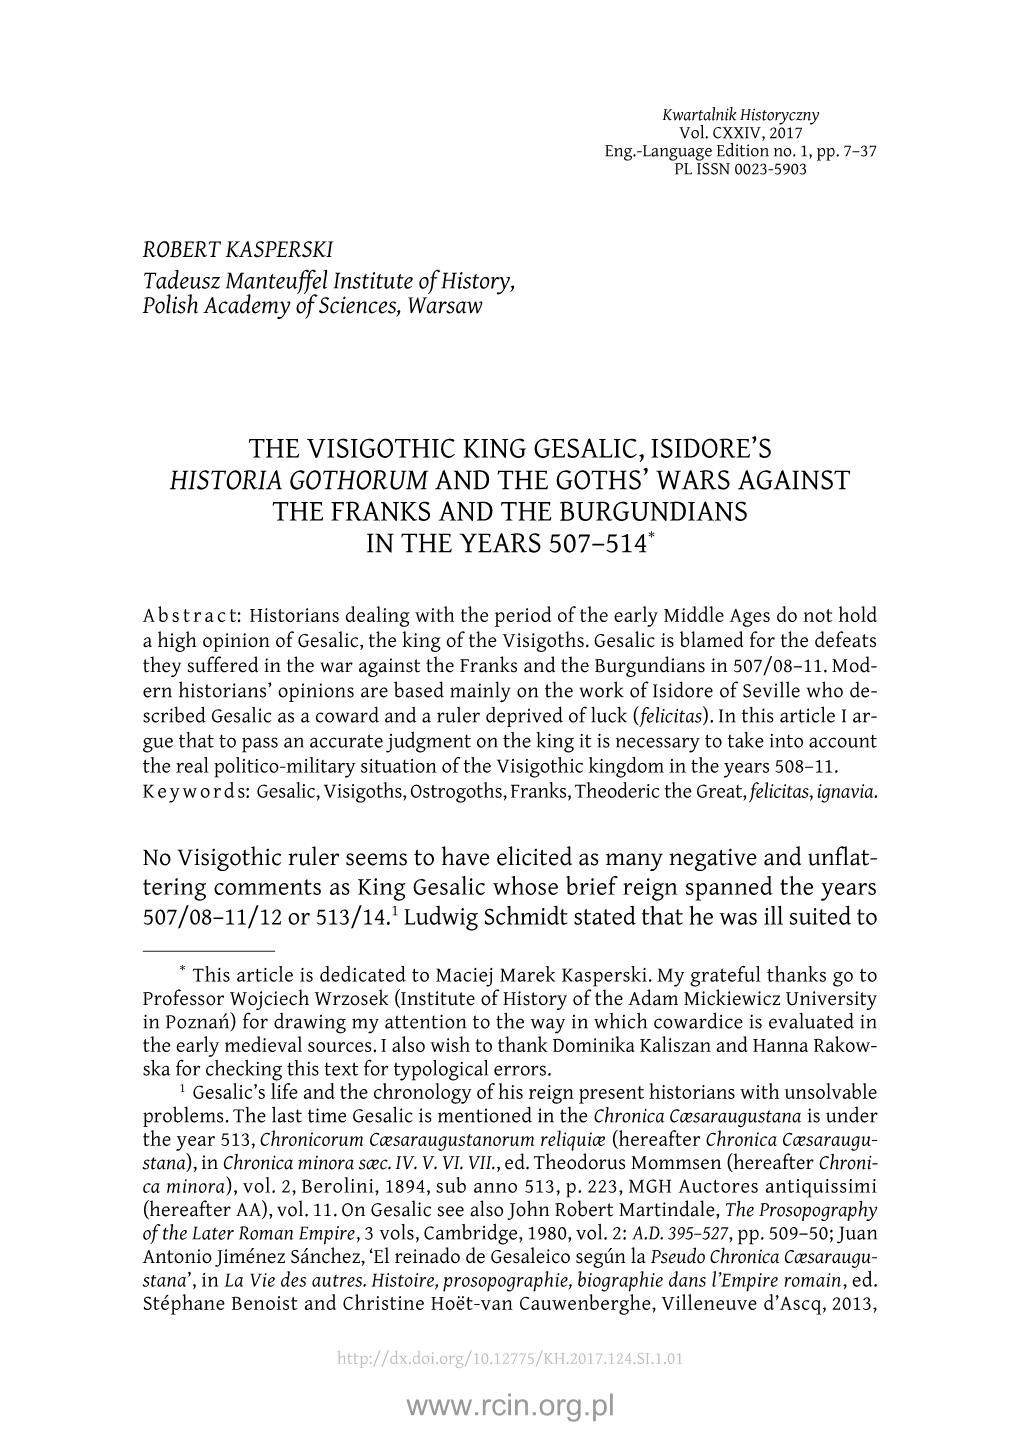 The Visigothic King Gesalic, Isidore's Historia Gothorum and the Goths